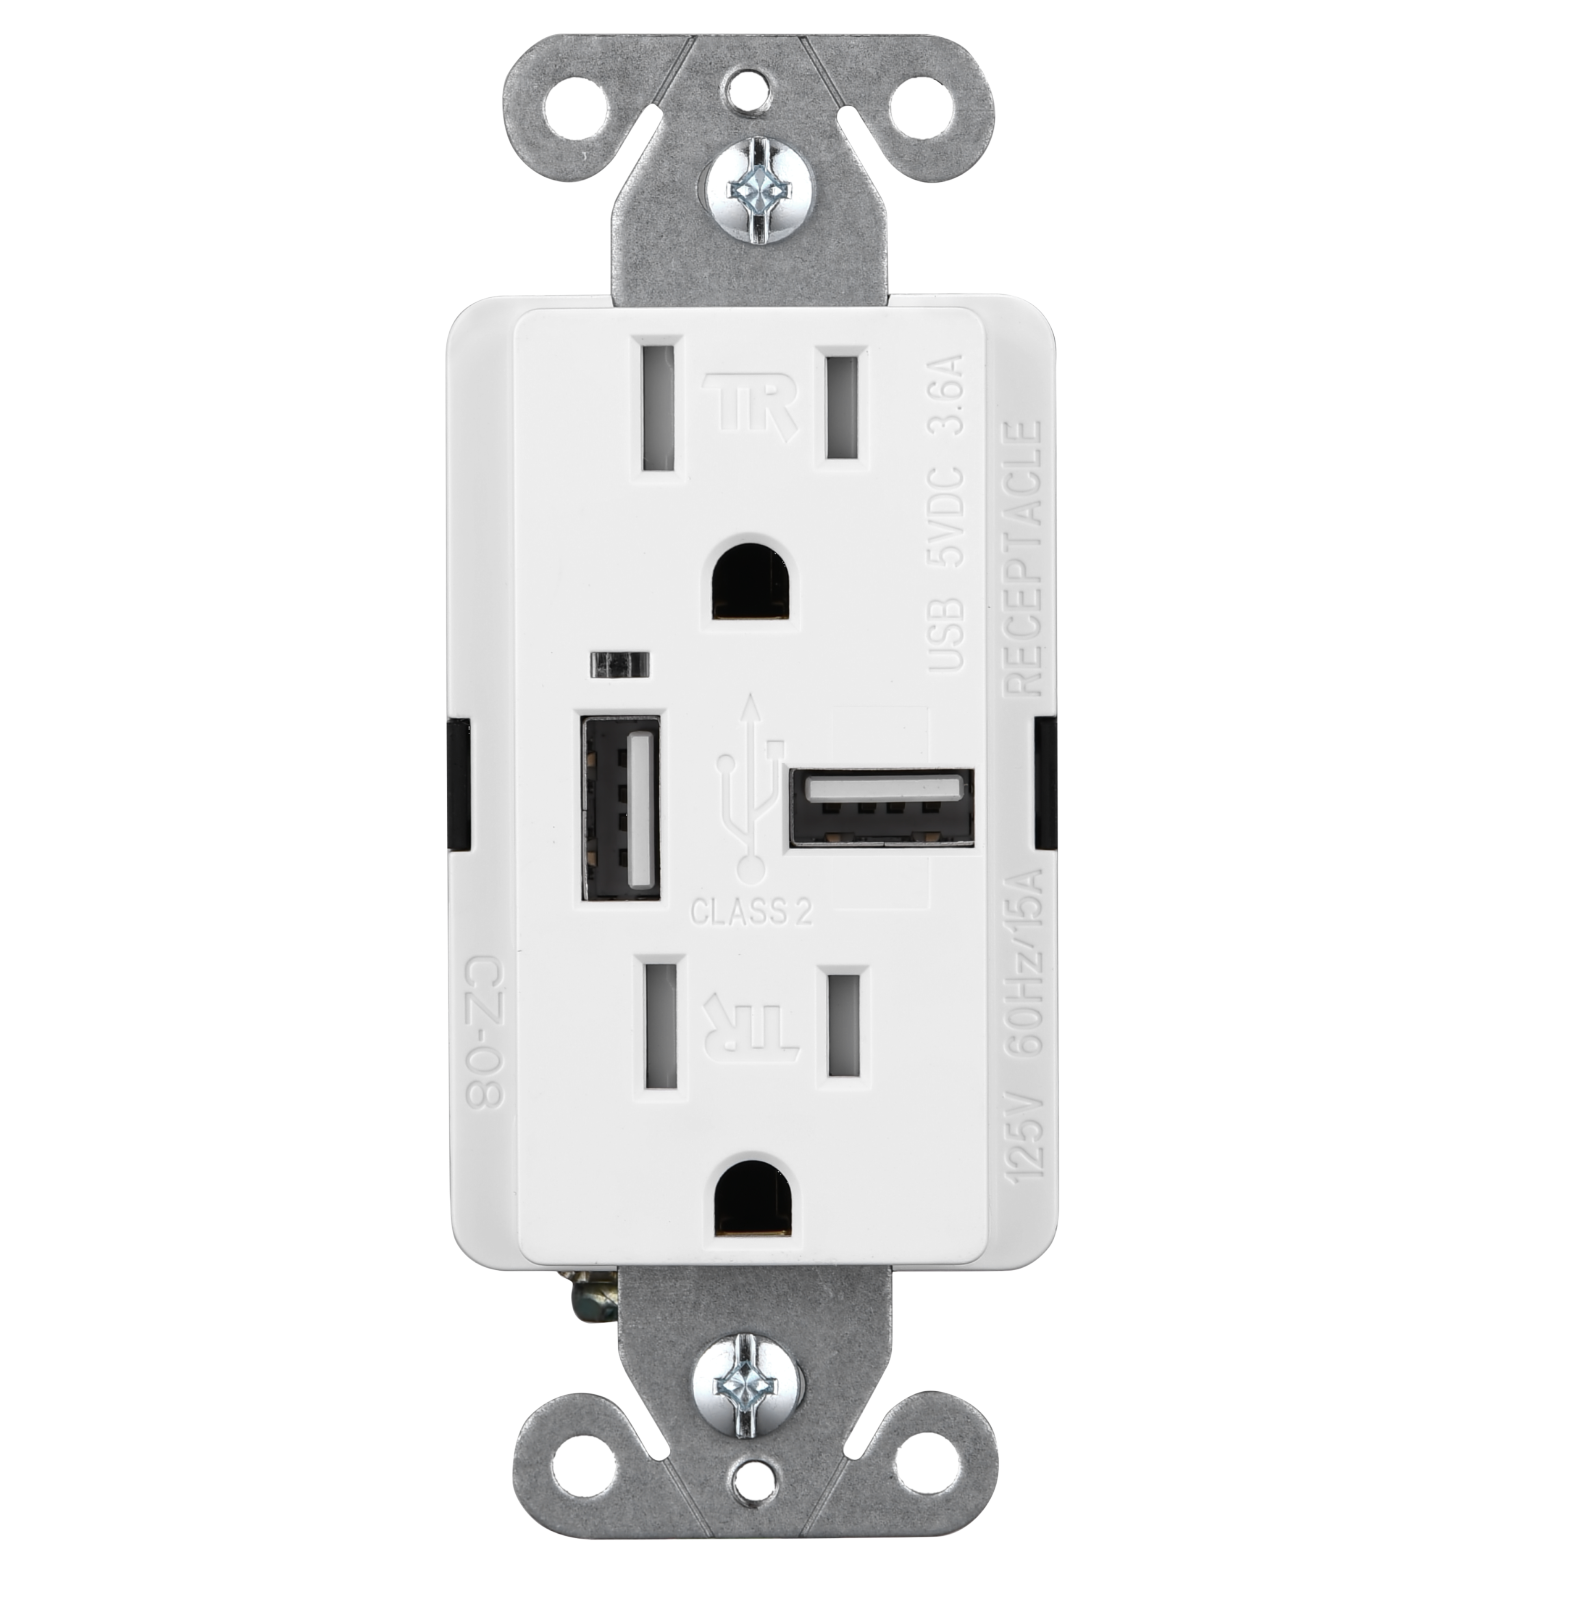 factory Outlets for Top 5 USB Outlets - USB Wall Outlets CZ-08 – Faith Electric